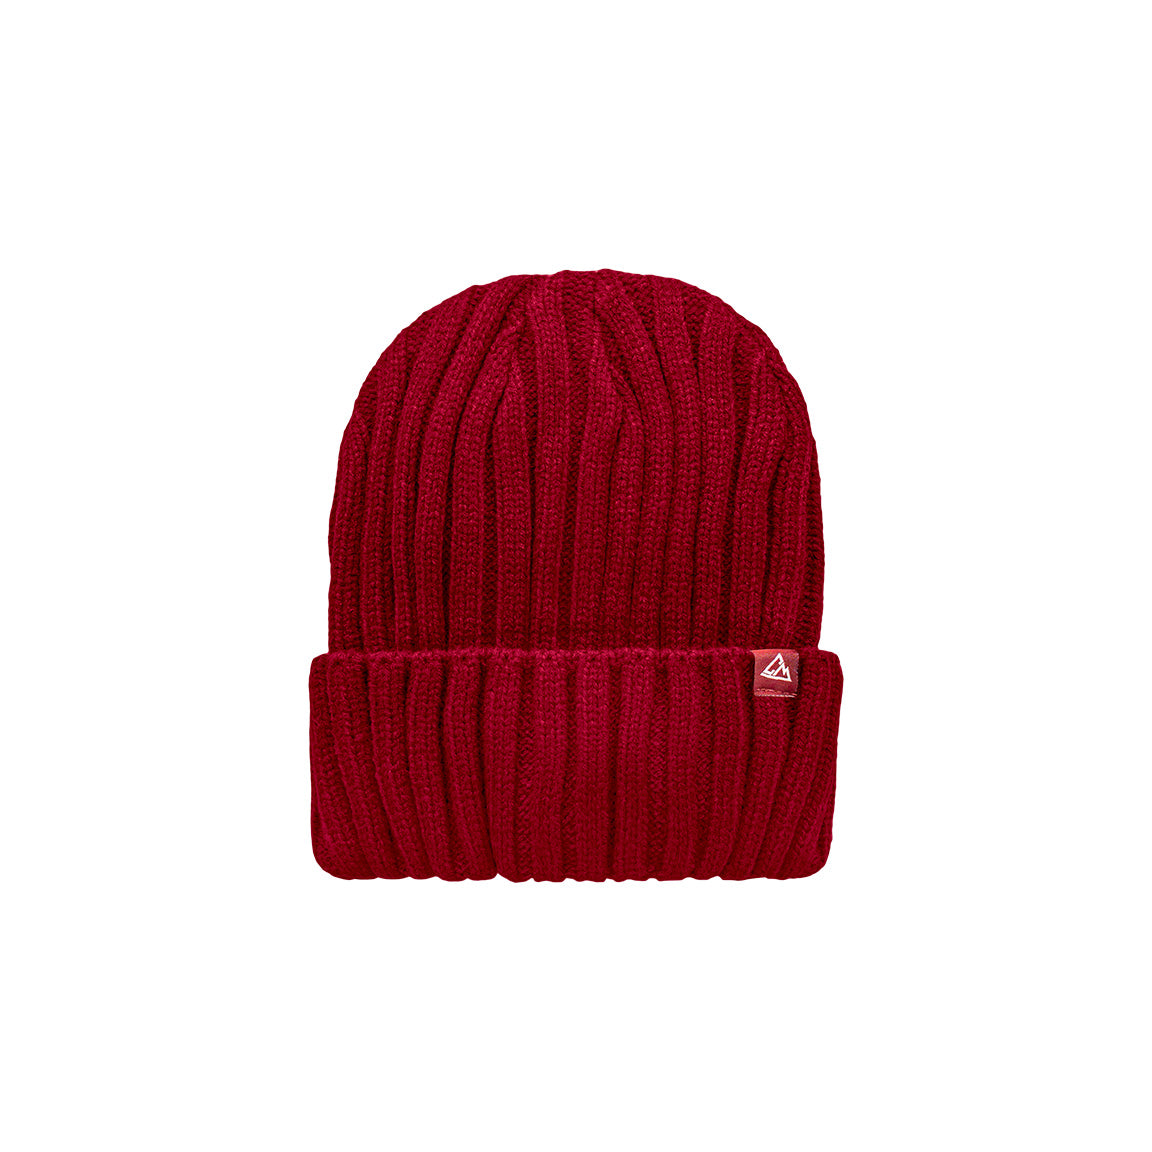 A red ribbed beanie with a fold-up cuff, which is adorned with a small triangular logo patch on the edge.